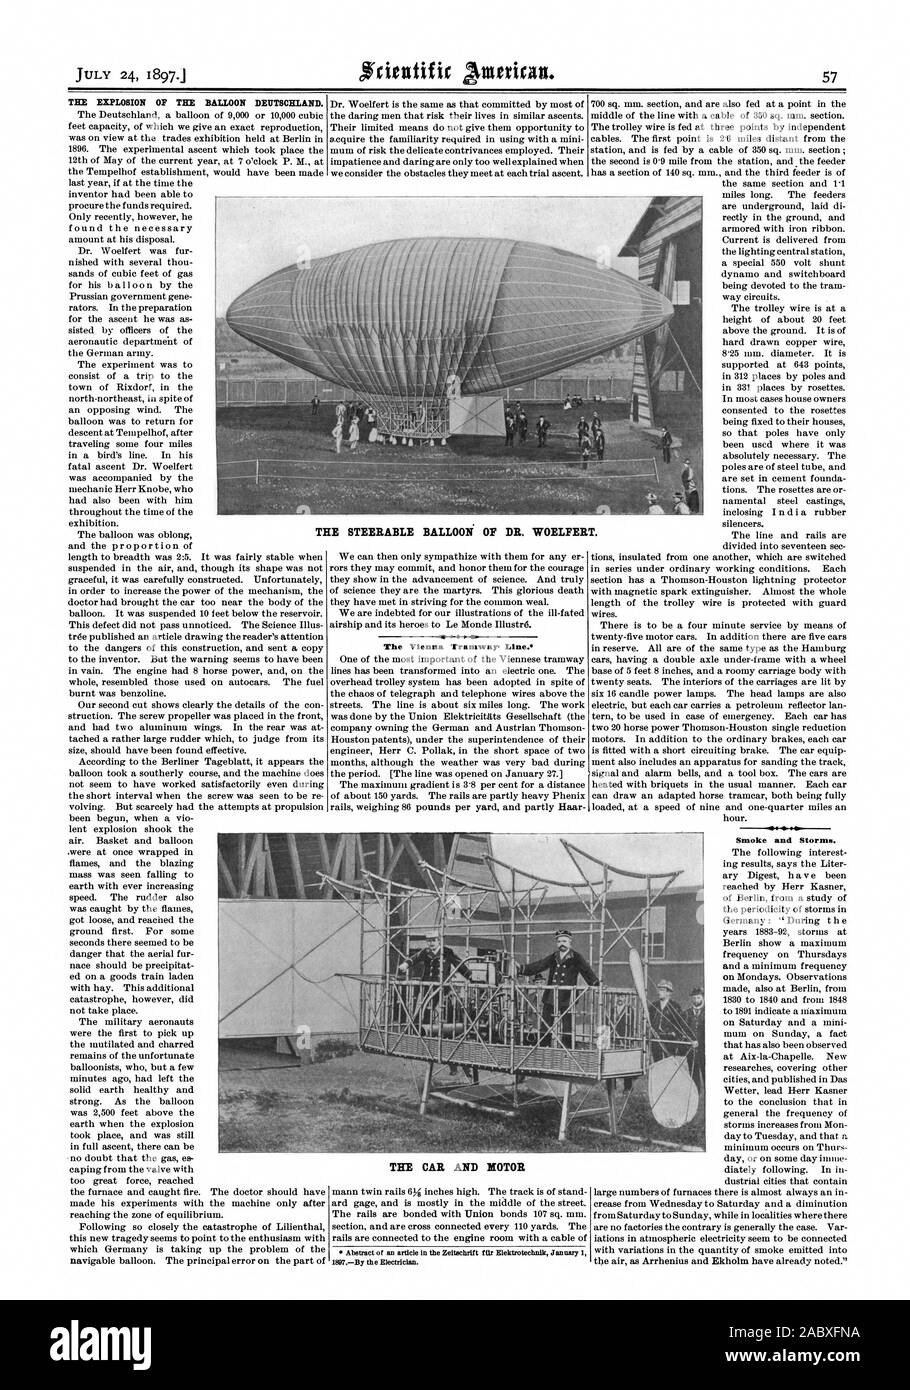 THE EXPLOSION OF THE BALLOON DEUTSCHLAND. The Vienna Tramway Line. THE CAR AND MOTOR Smoke and Storms. THE STEERABLE BALLOON OF DR. WOELFERT., scientific american, 1897-07-24 Stock Photo